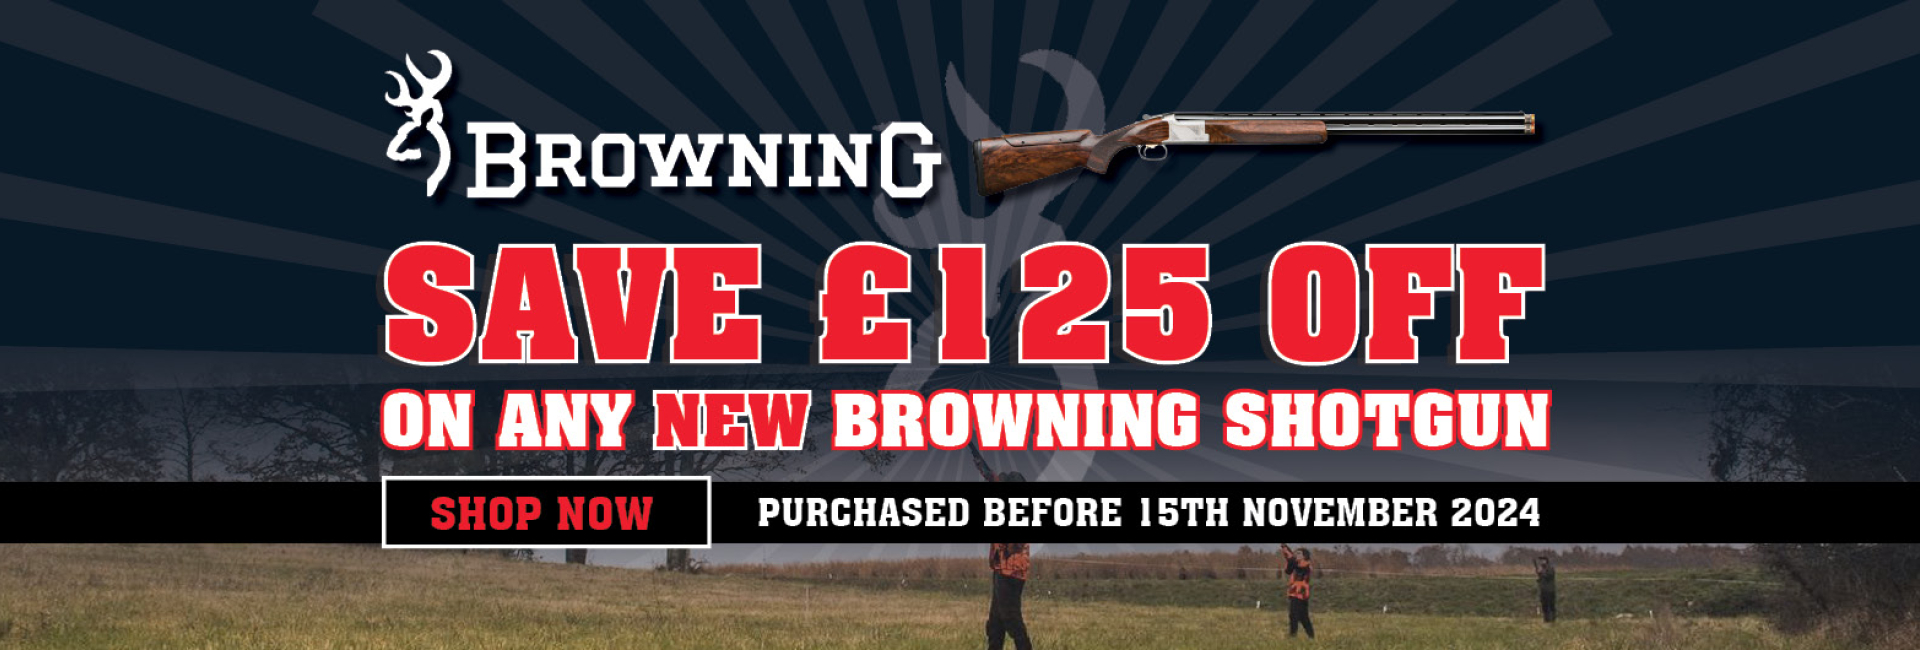 Browning £125 off Promotion - June 24